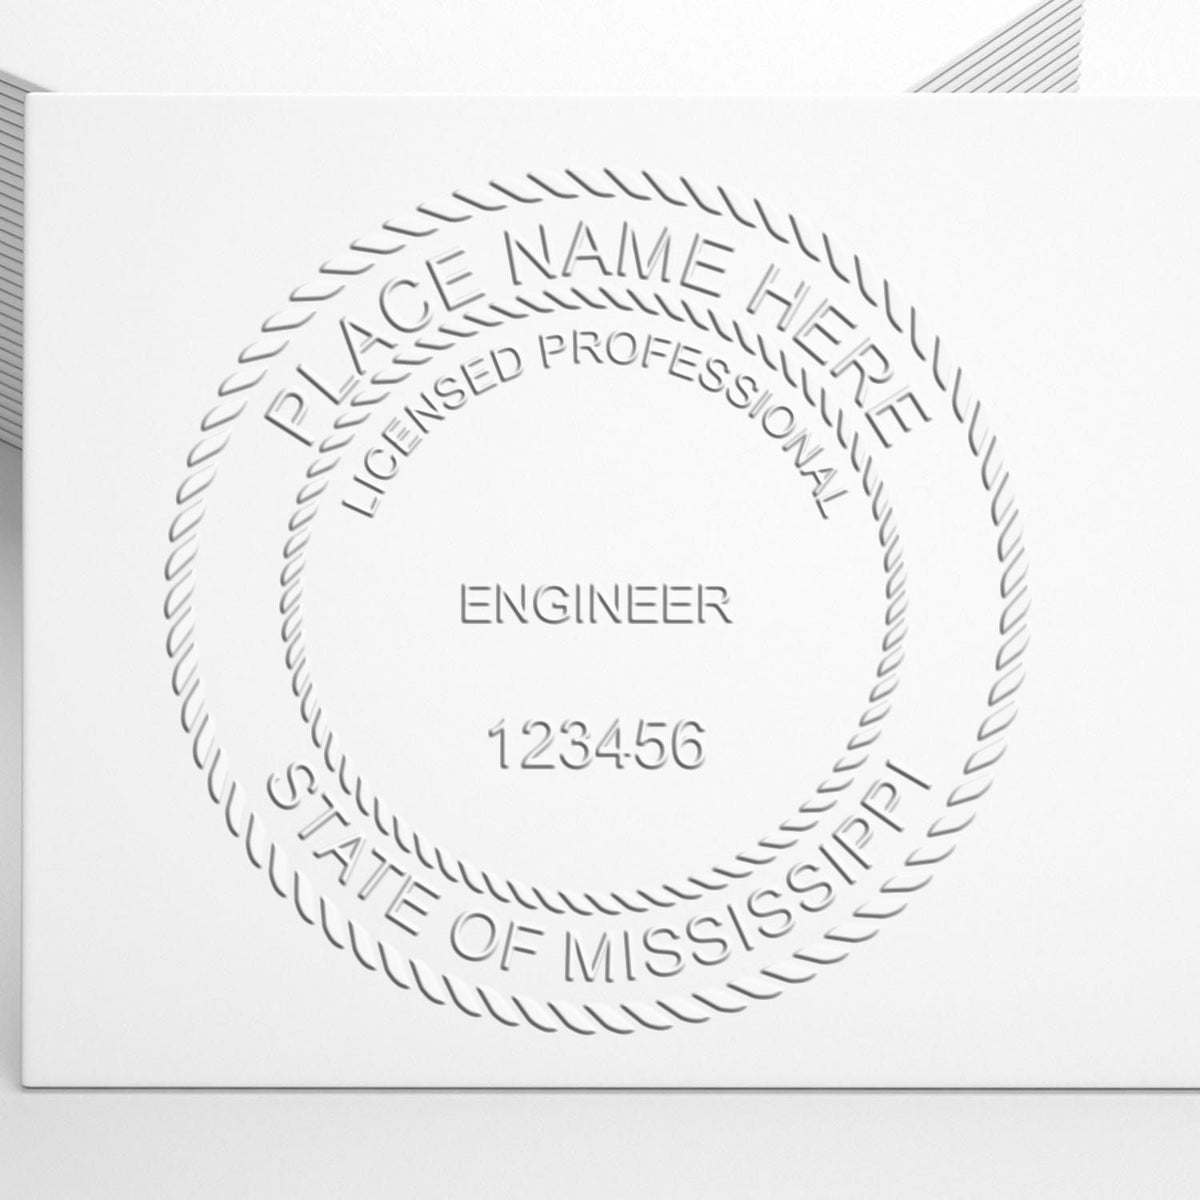 An alternative view of the State of Mississippi Extended Long Reach Engineer Seal stamped on a sheet of paper showing the image in use